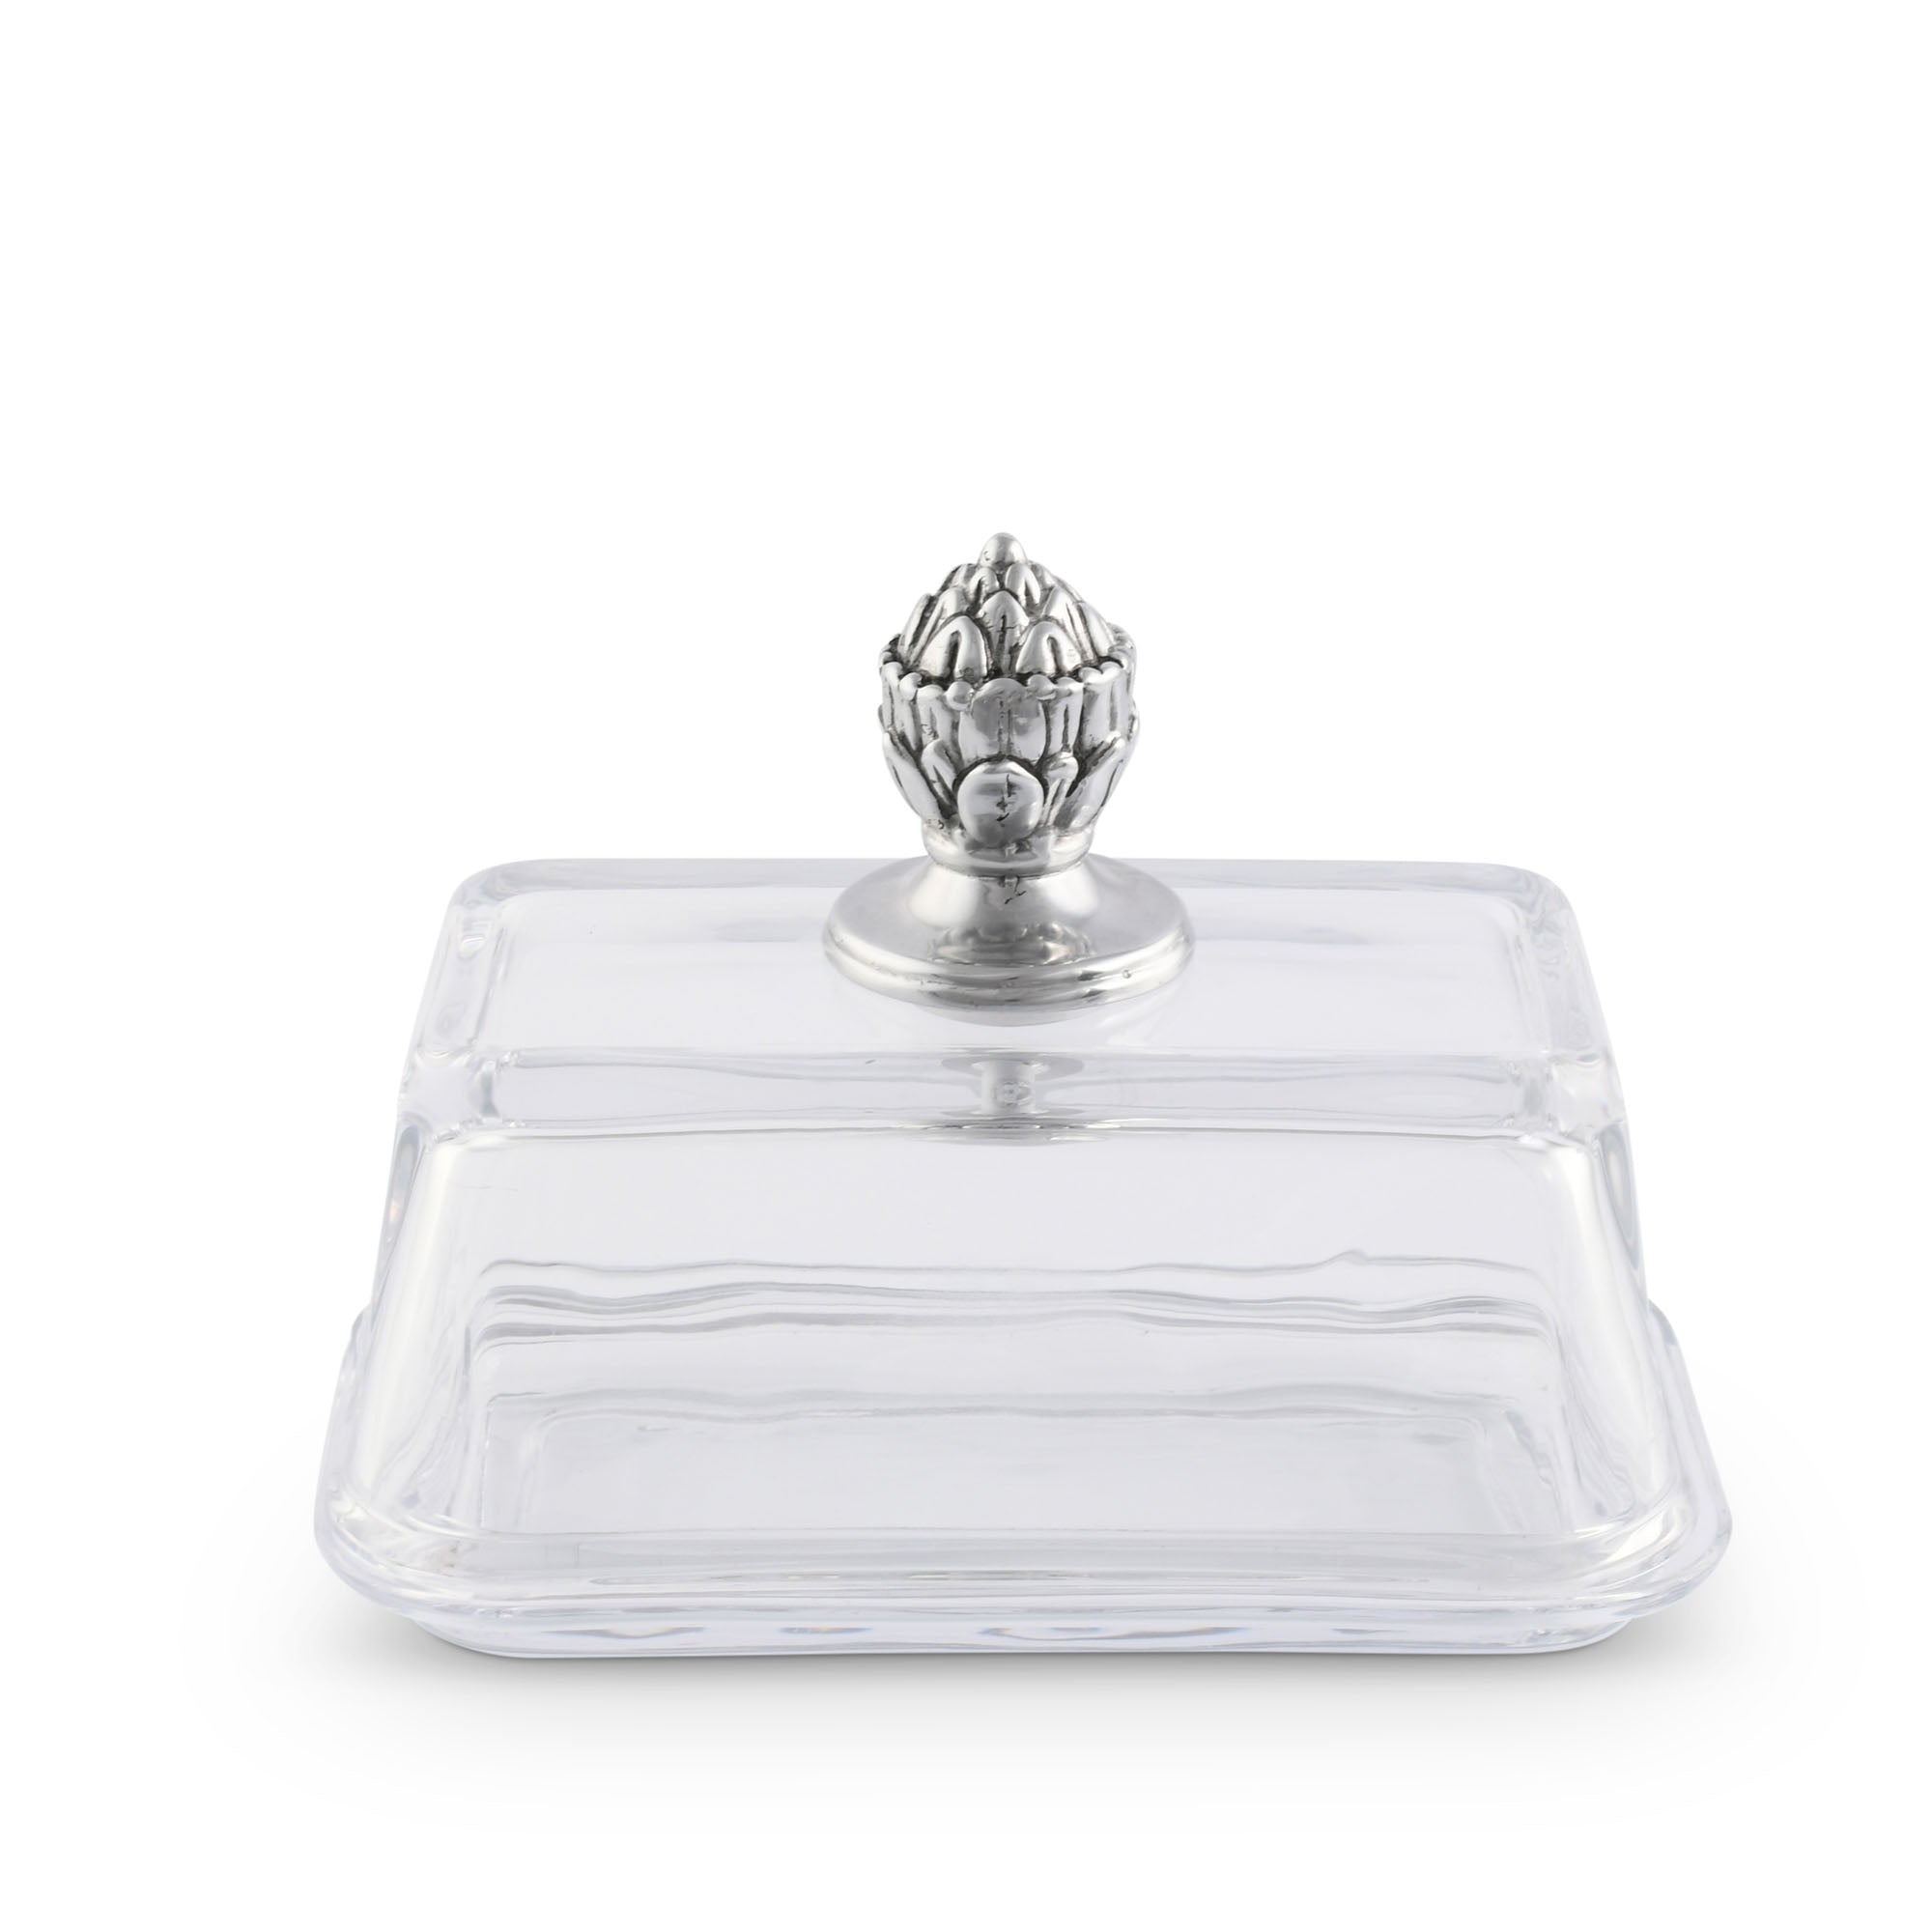 Arthur Court Butter Dish - Concho Product Image